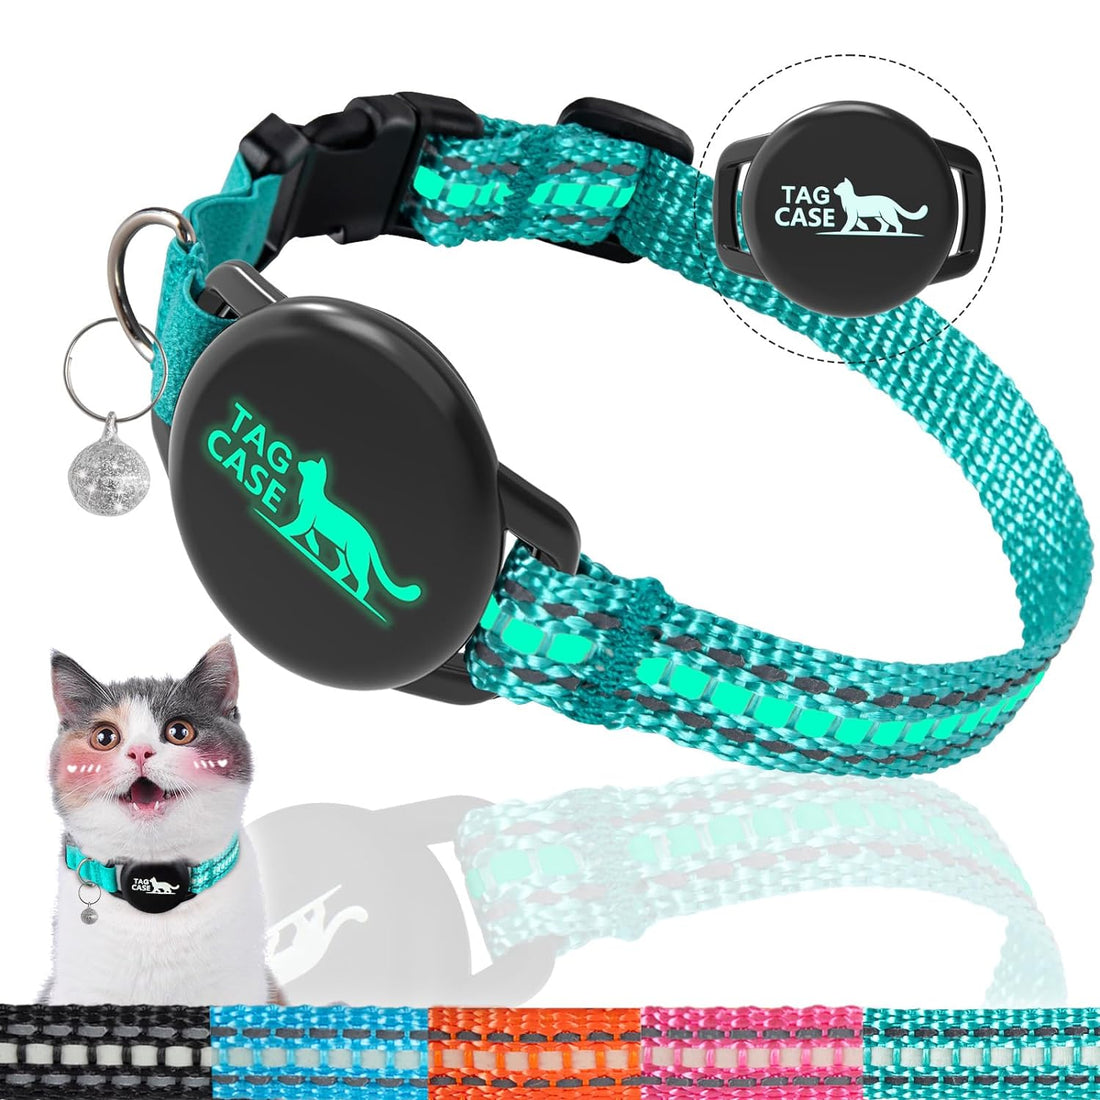 Luminous Airtag Cat Collar,PROFAVO Apple Air Tag Cat Collar with Airtag Holder,Reflective Cat GPS Tracker Collar for Girl Boy Small Cats,Kittens,and Puppies (with Bell)